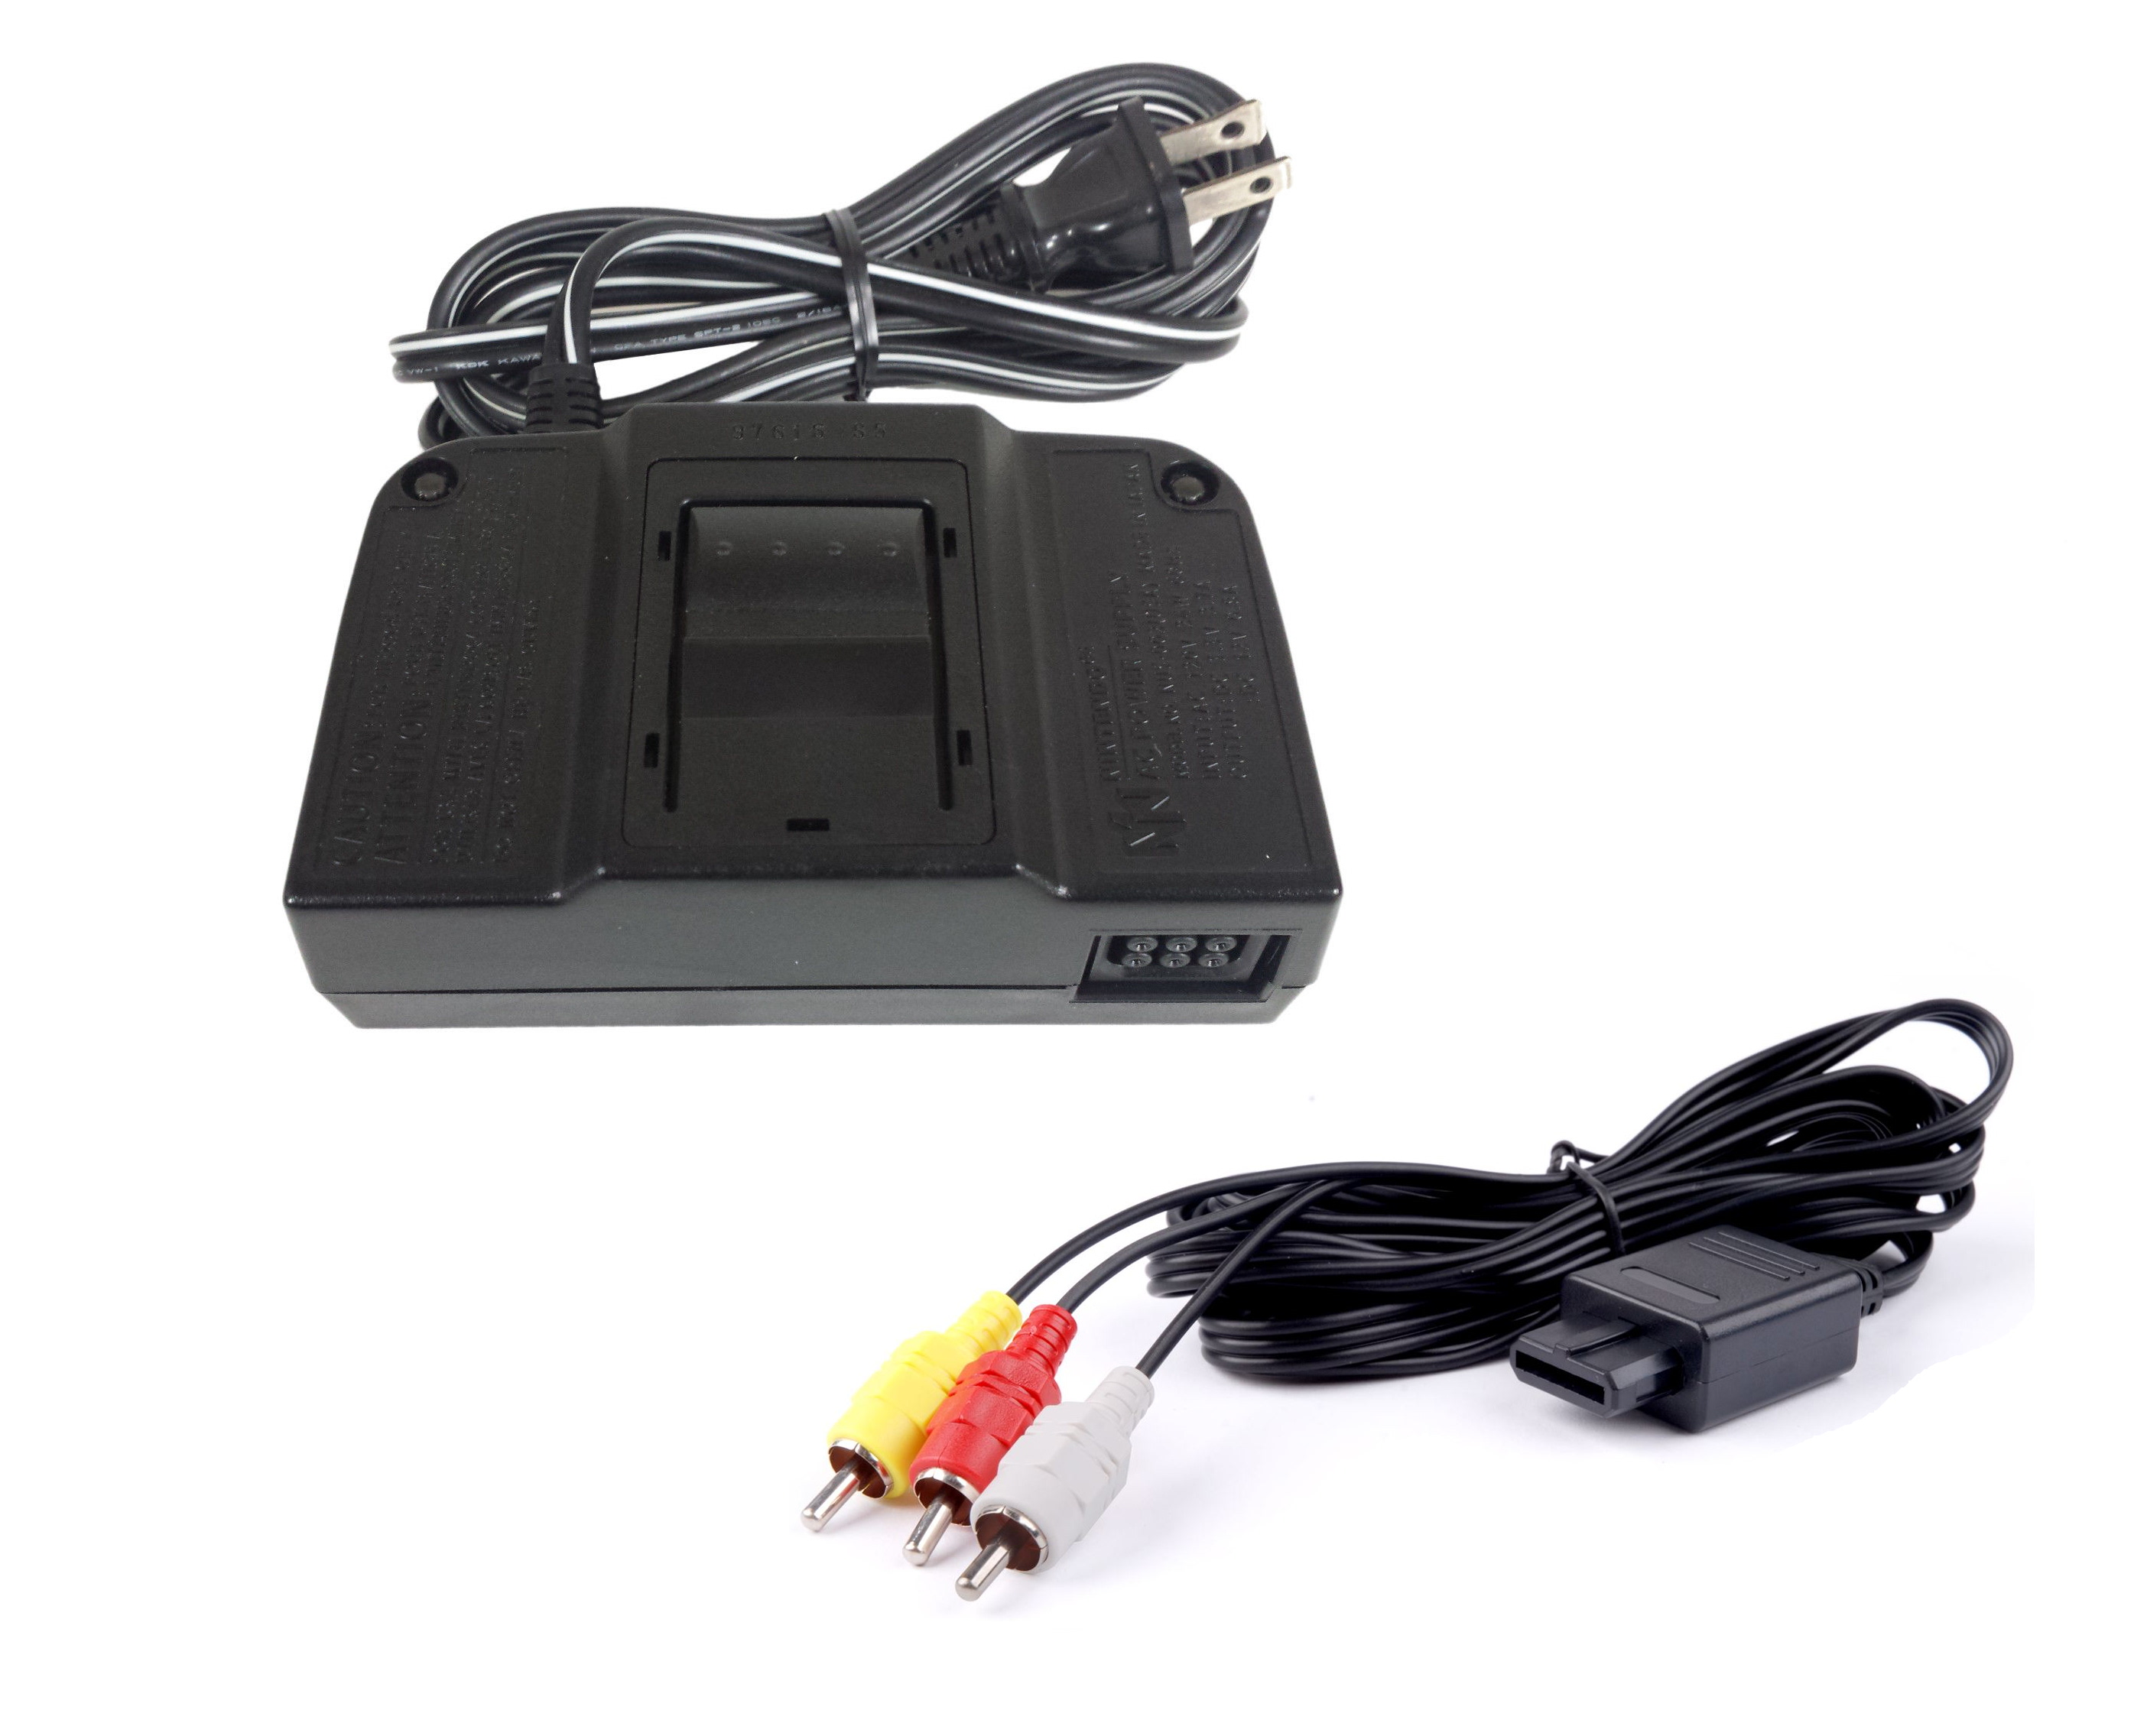 Restored Nintendo 64 Video Game Console with Controller and Cables (Refurbished) - image 3 of 4